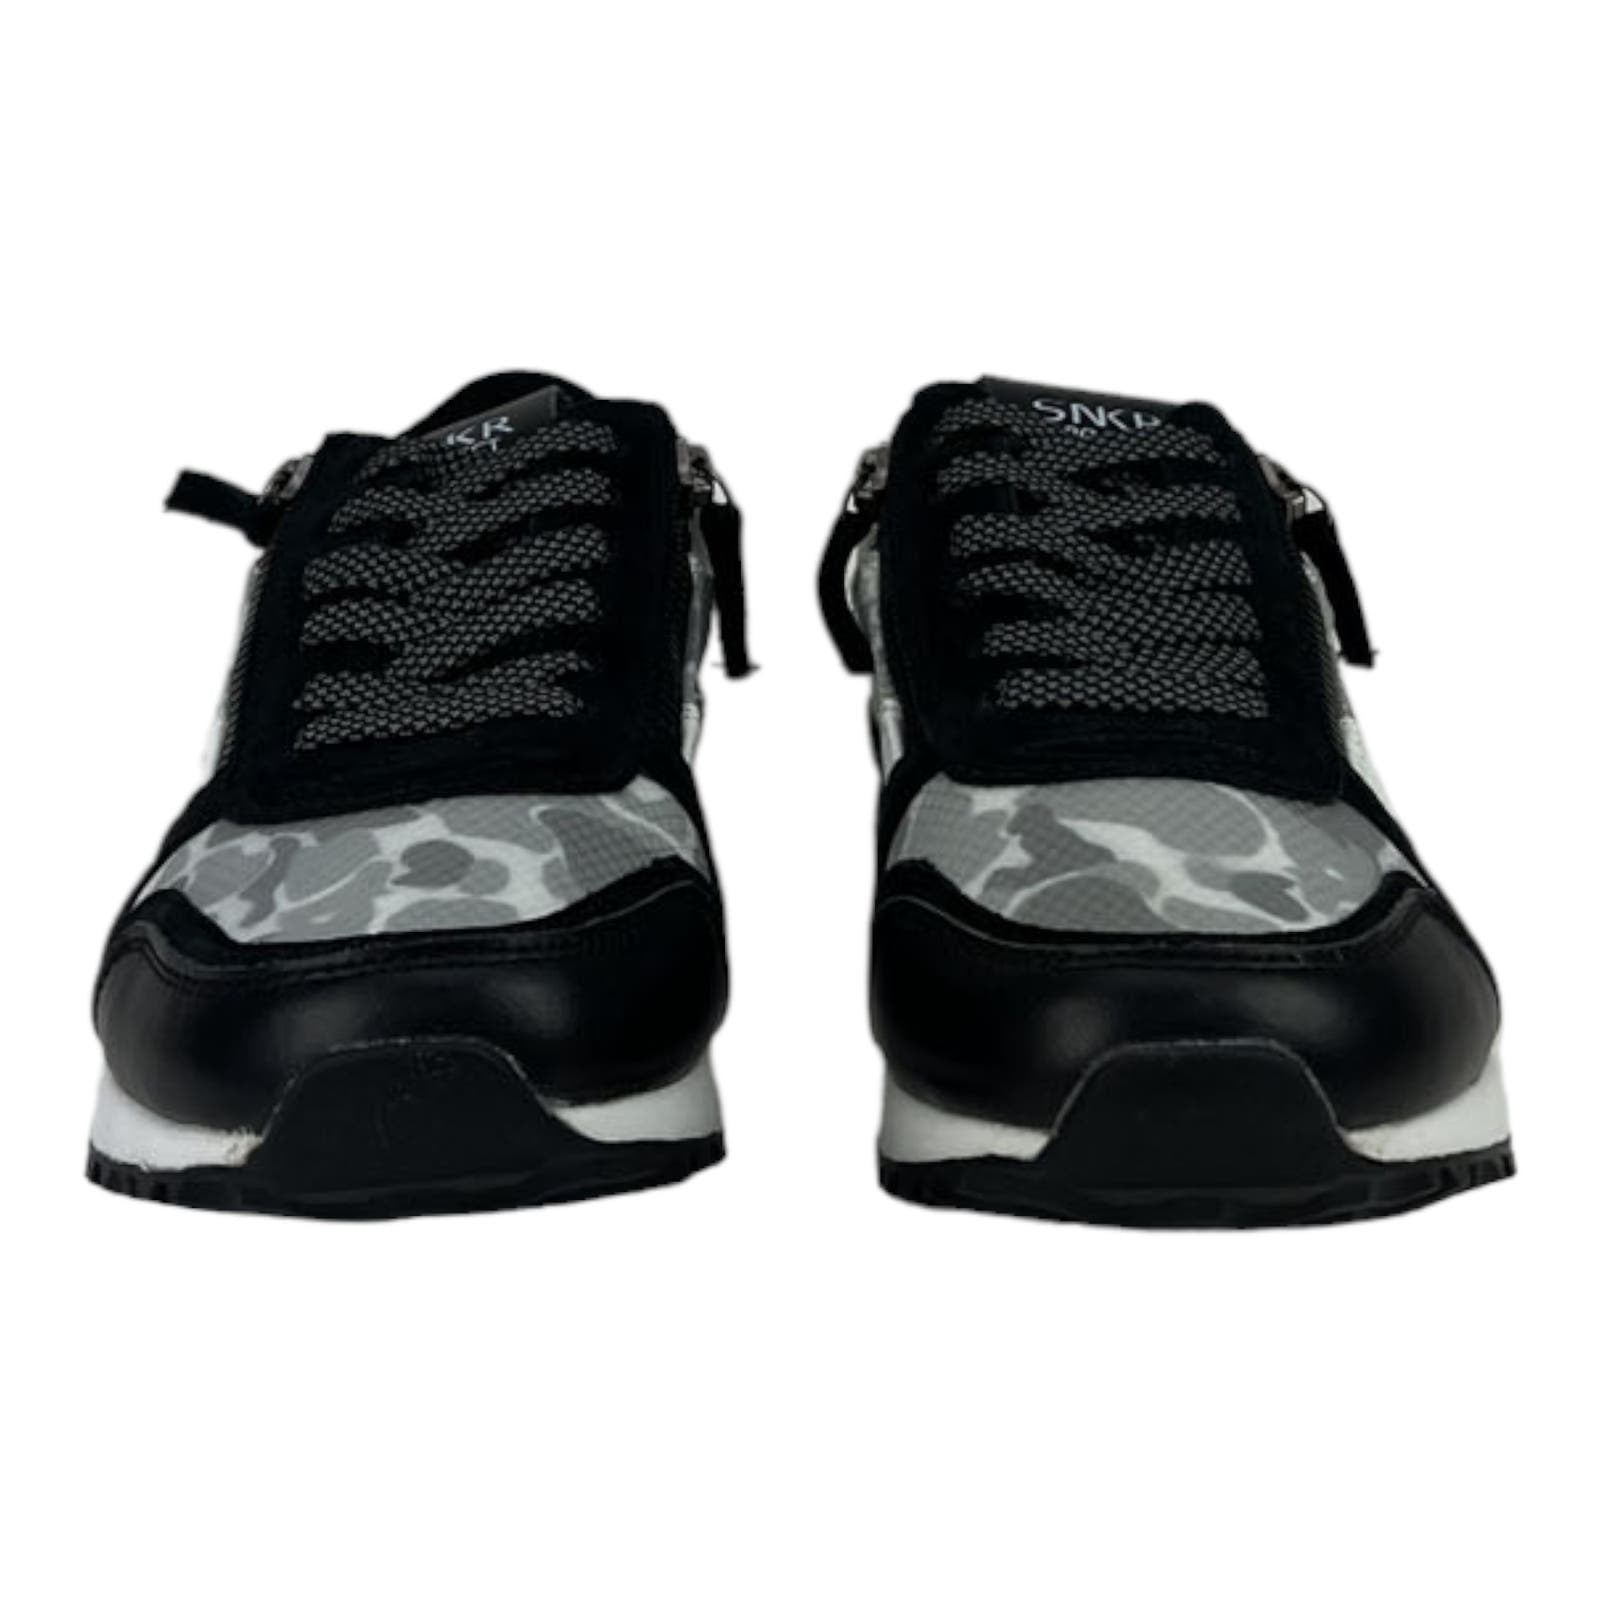 SNKR Project Men US 11.5 Rodeo 1.5 Black Grey Camo Sneakers